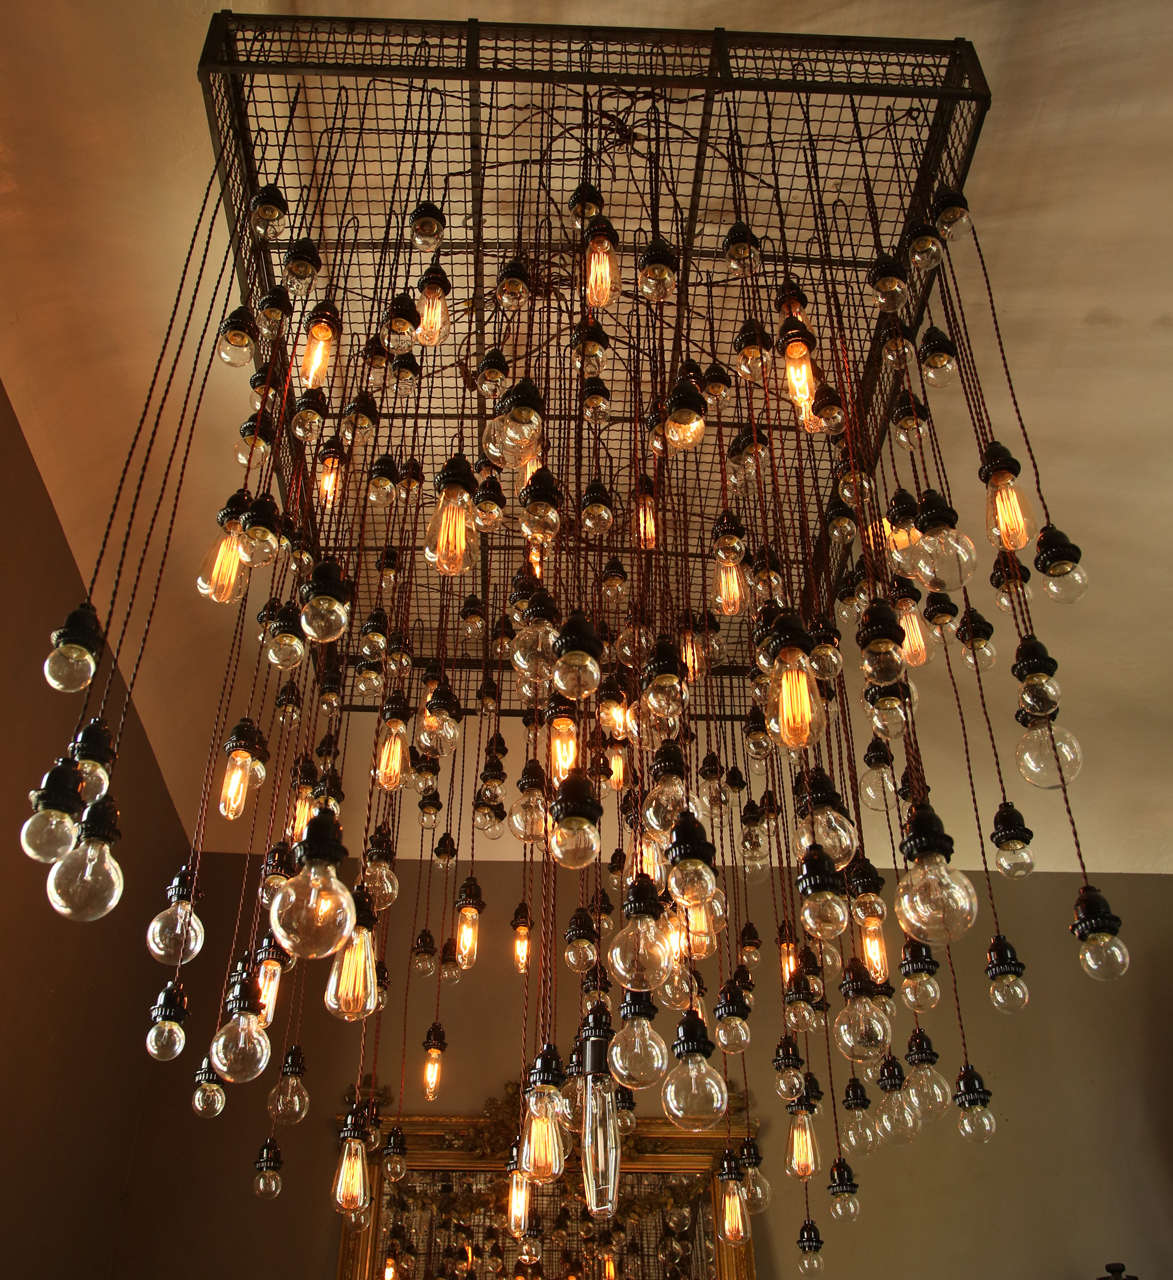 John Varvatos commissioned Alexandre Ferucci to design this fixture, which ended up being one of the signatures of their luxury retail showrooms across the world. 

A mixture of functional and non-functional industrial bulbs. Fixture is able to be